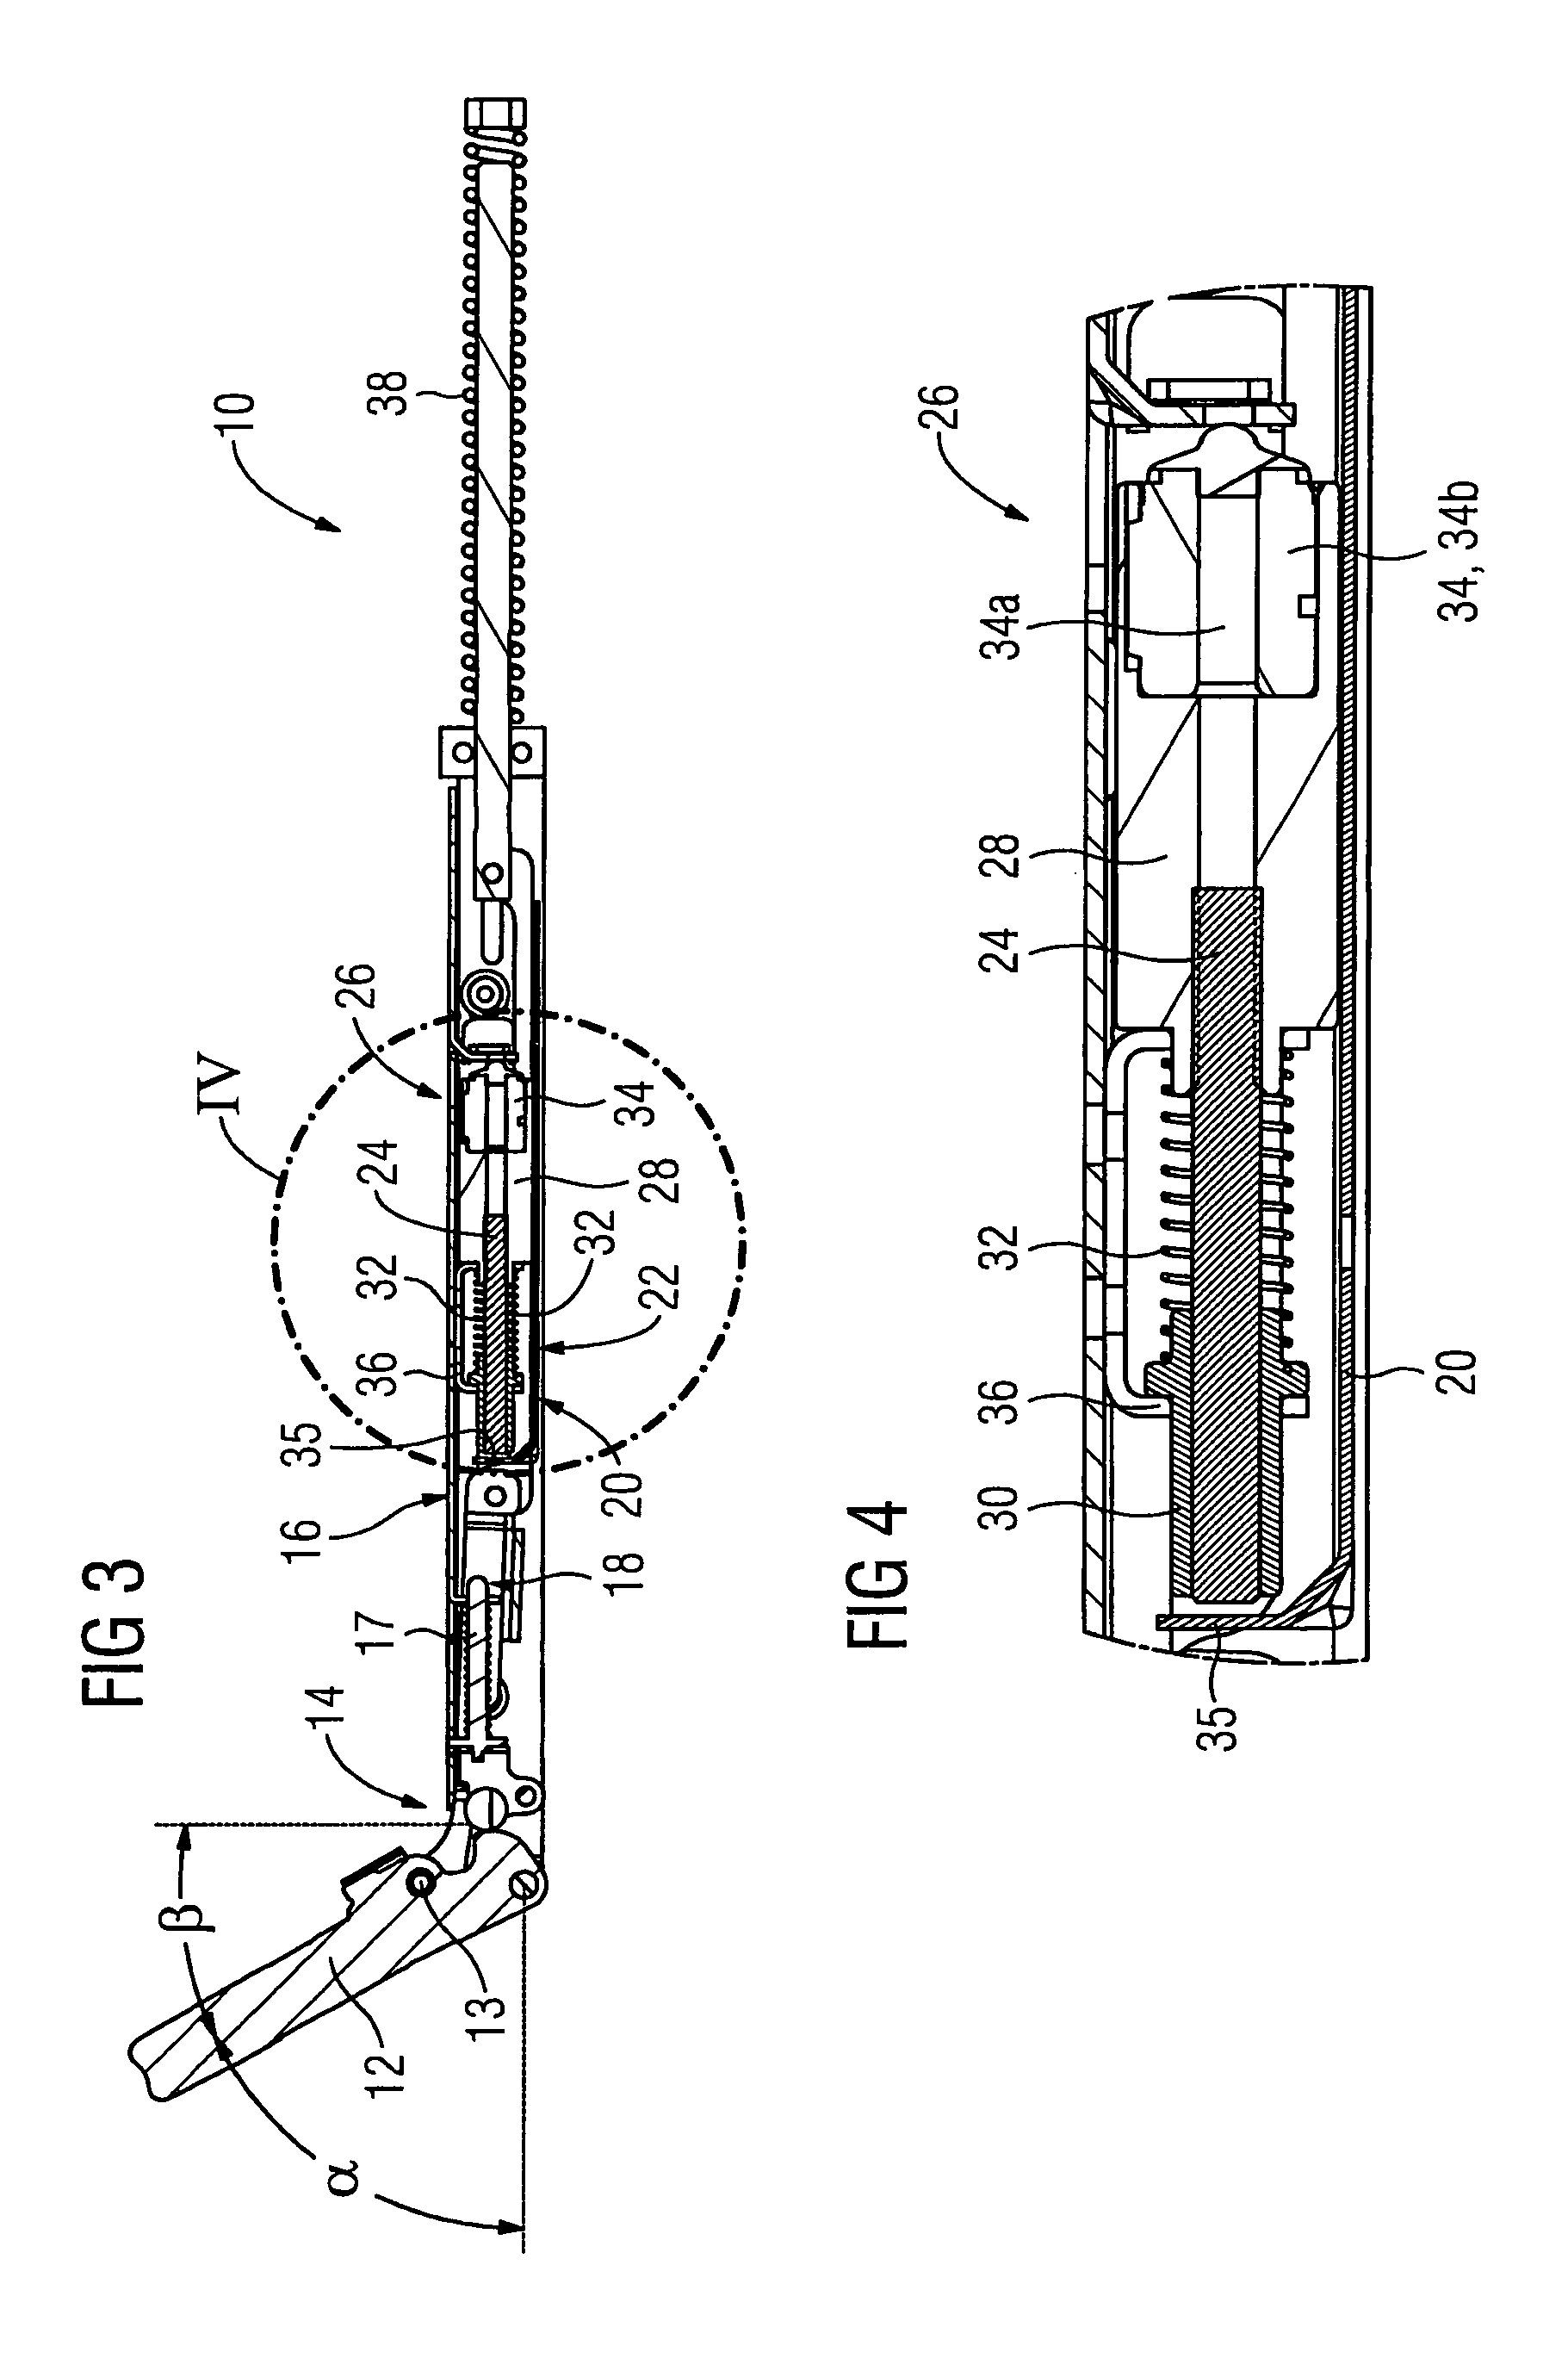 Oven door opening and closing device